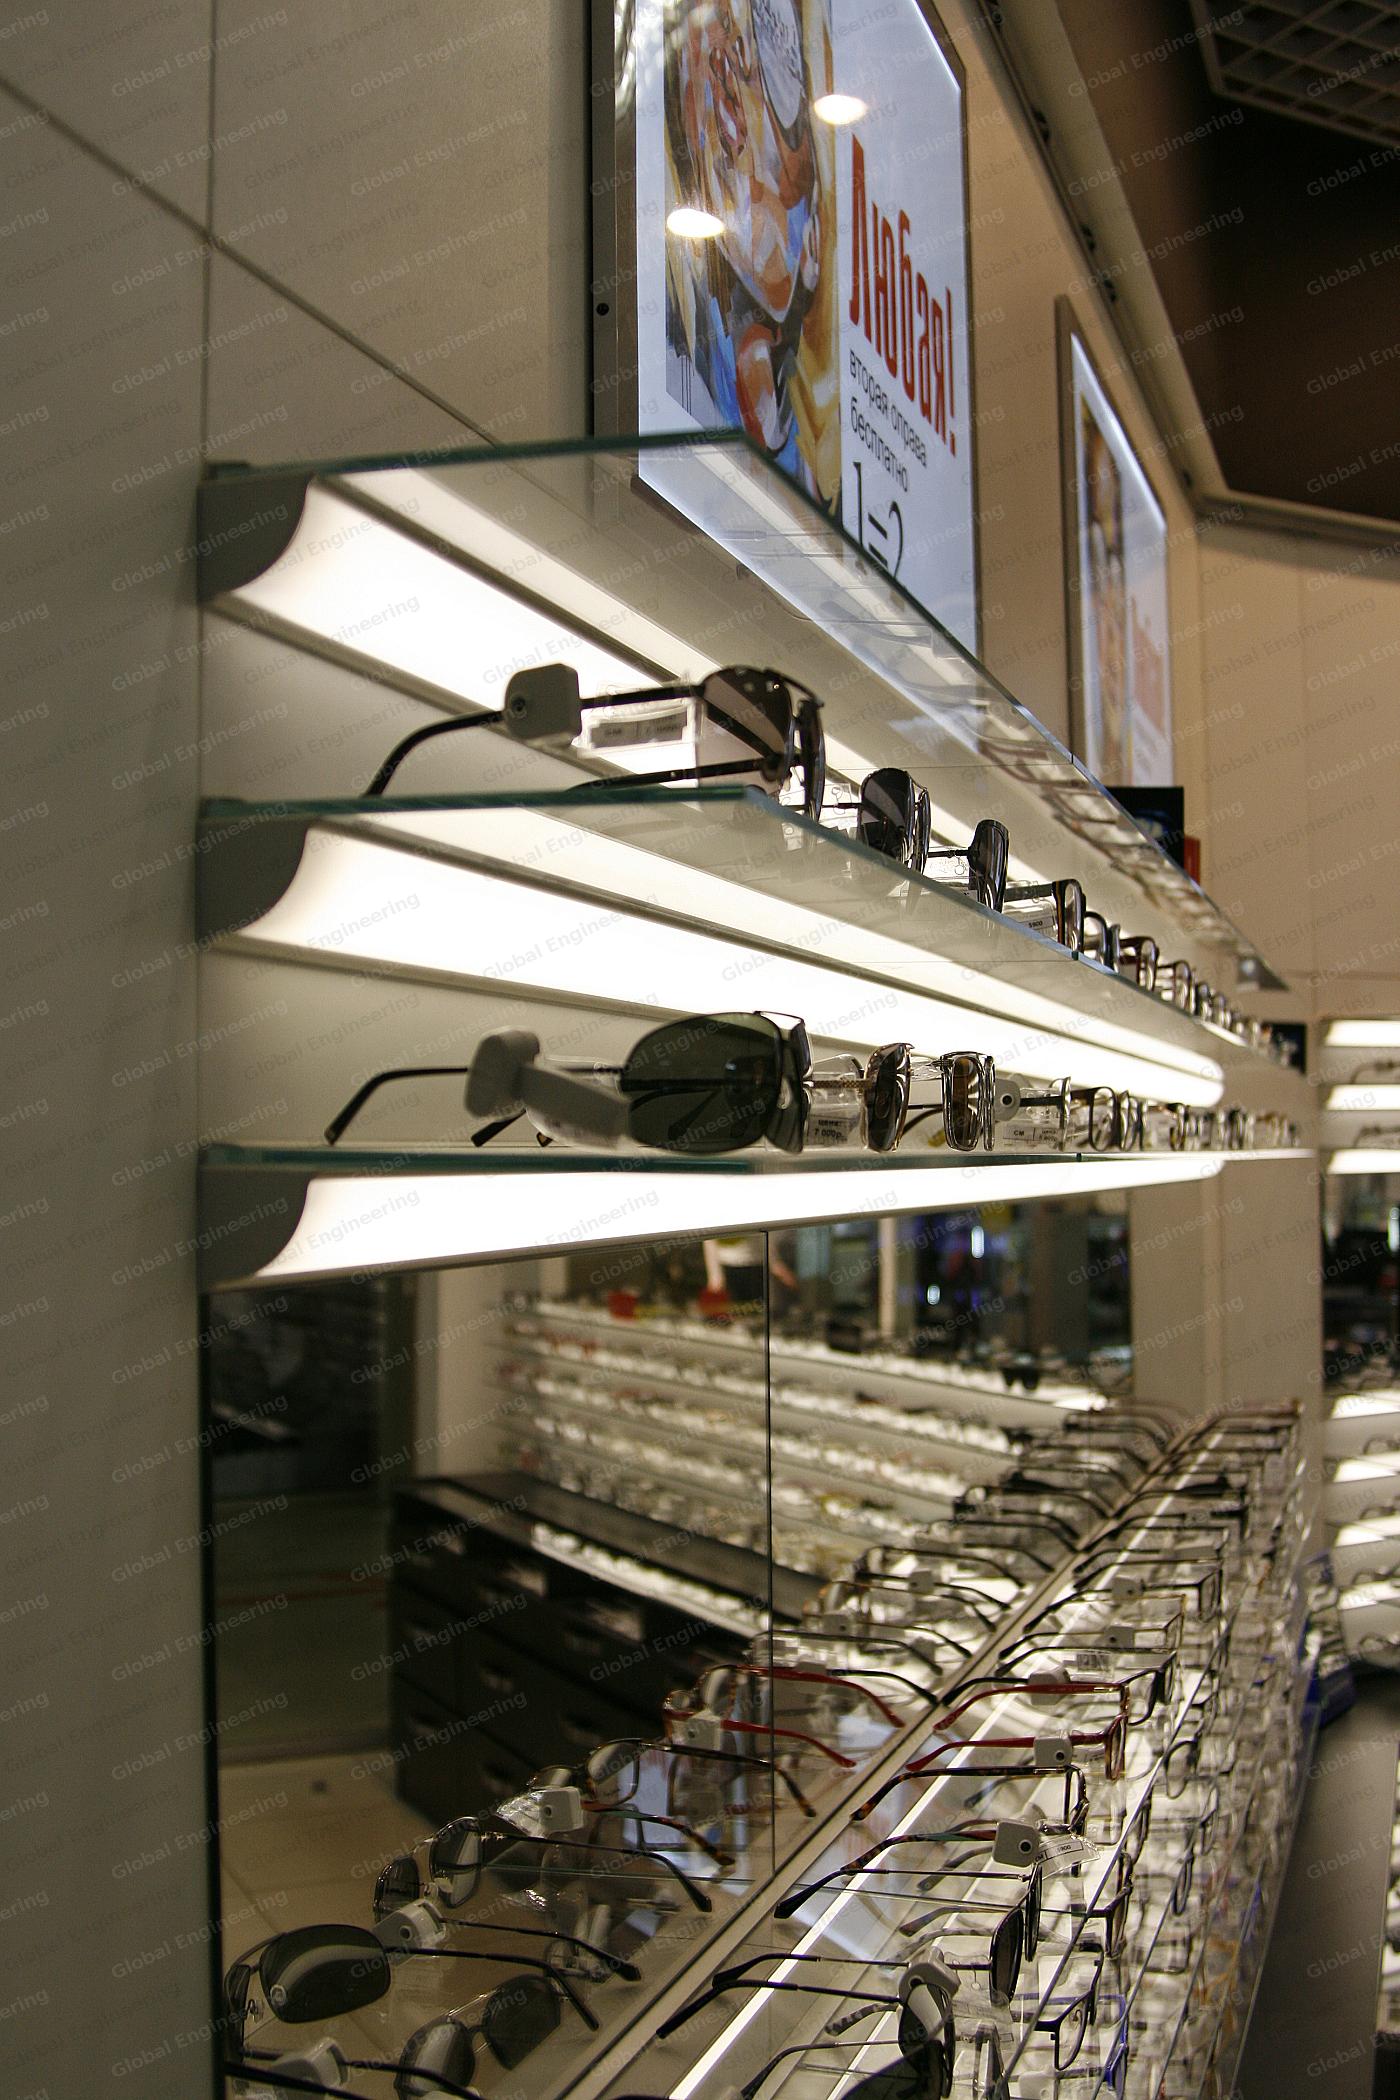 ArmLED - open-ended shelves with Illumination